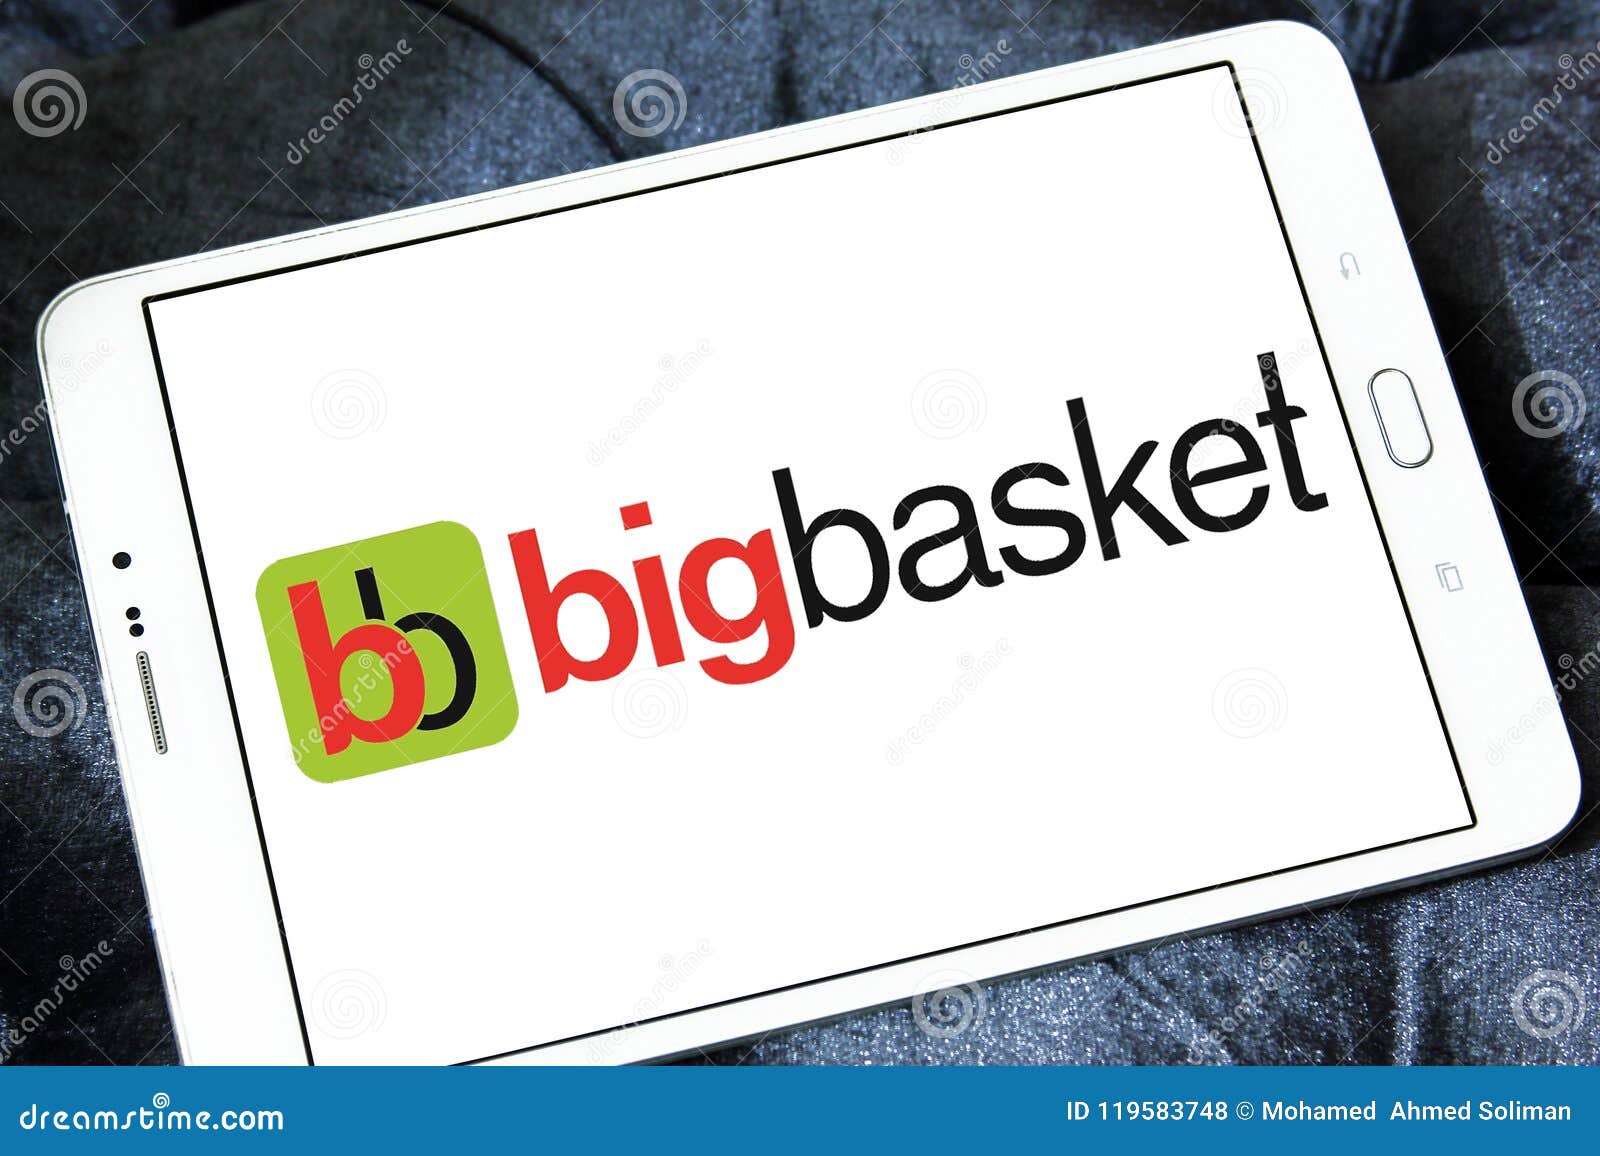 How to apply Big Basket coupon code - YouTube-cheohanoi.vn